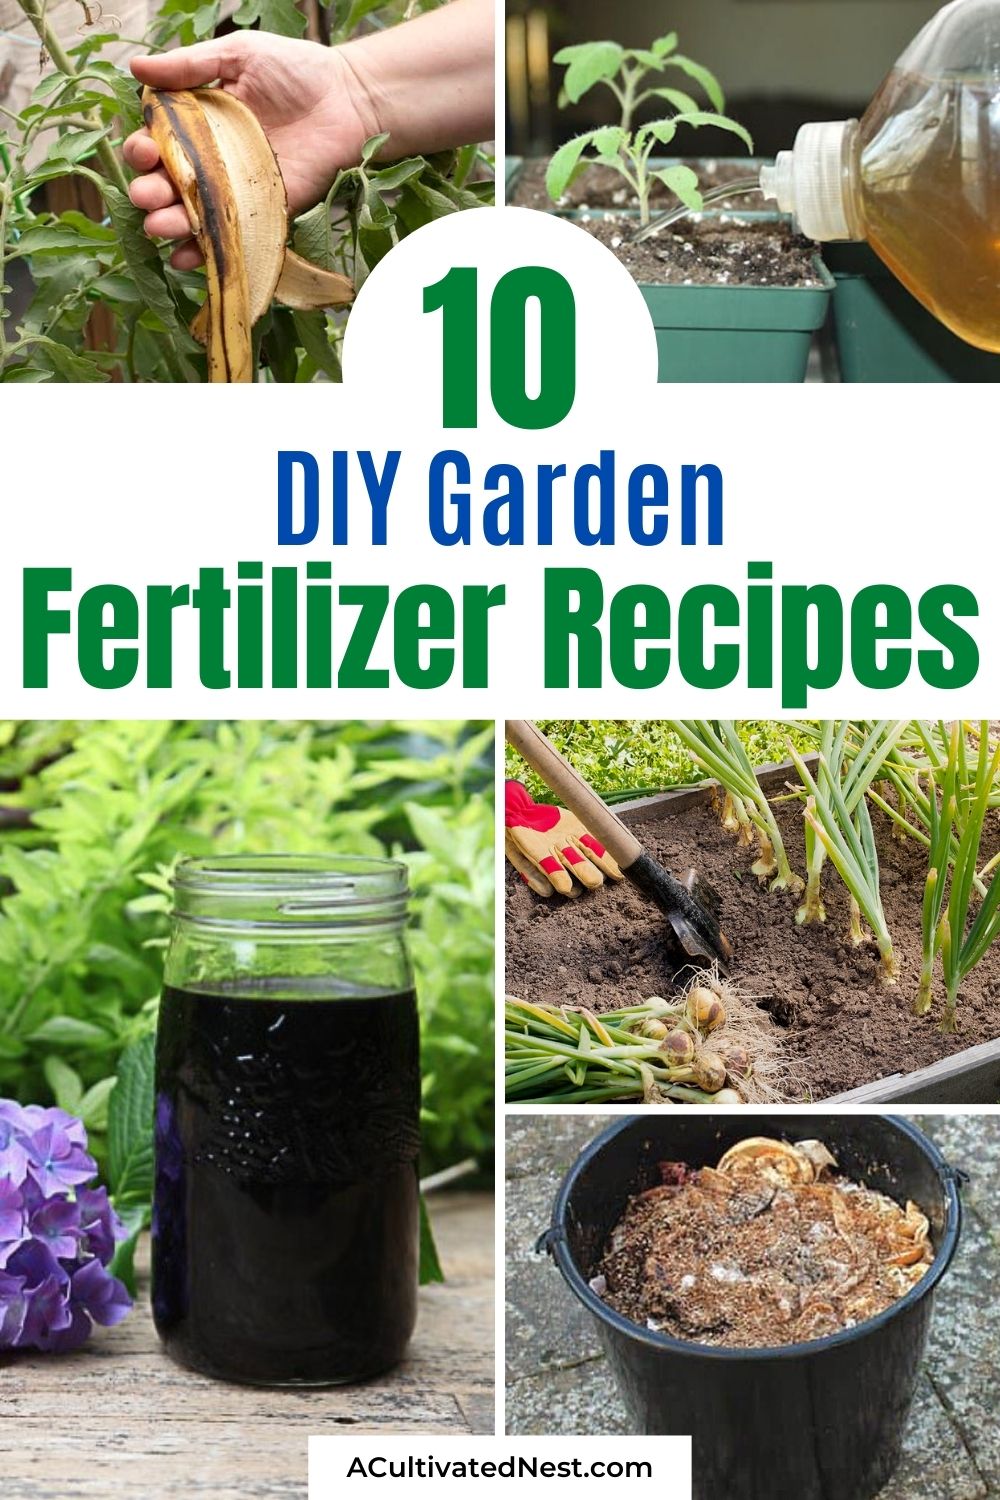 10 Best Homemade Plant Fertilizers- If you want your garden's plants to grow faster and bigger, then you need to try some of these 10 homemade plant fertilizers! These are great for both vegetable and flower gardens! | DIY gardening products, #gardeningTips #garden #diyGarden #DIY #ACultivatedNest